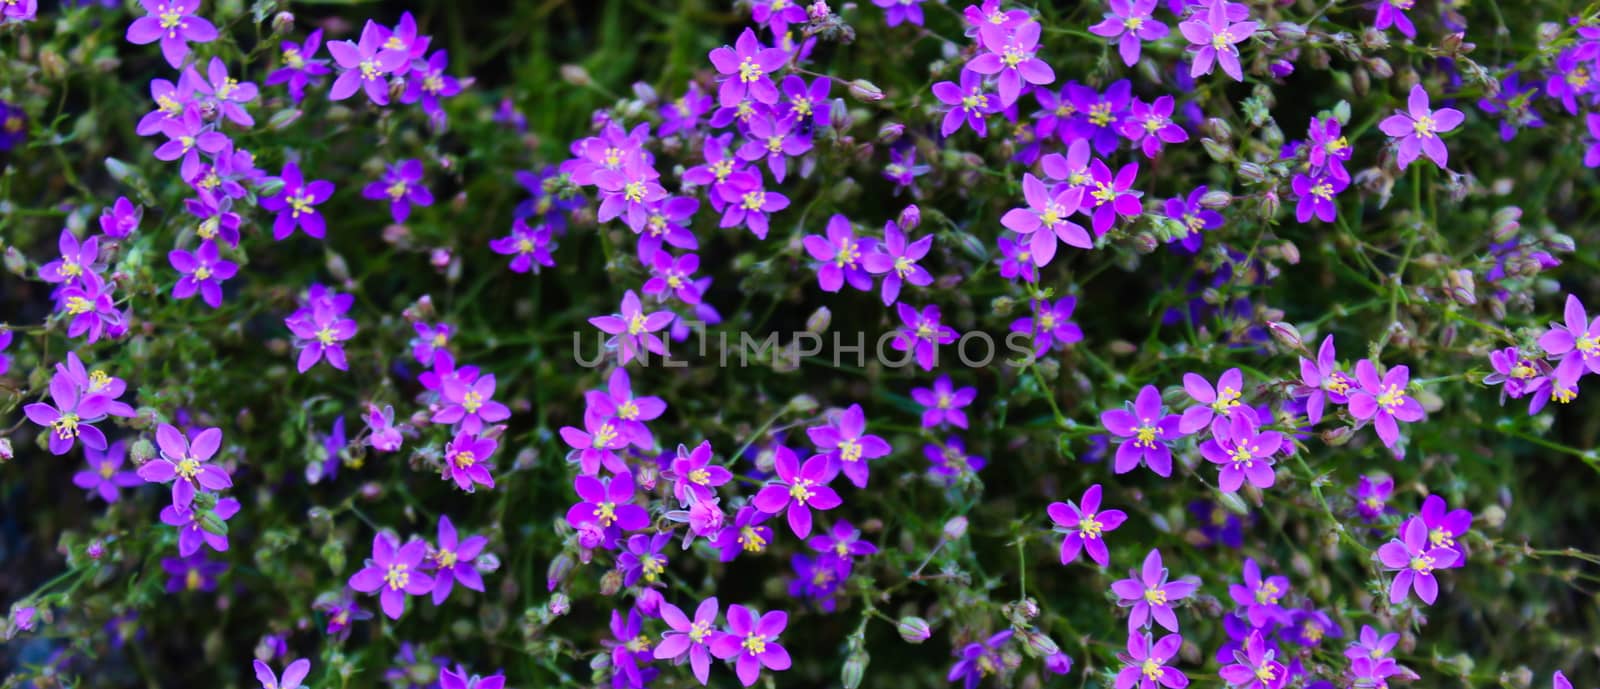 Banner of a very small invasive purple flowers in Beja, Portugal.